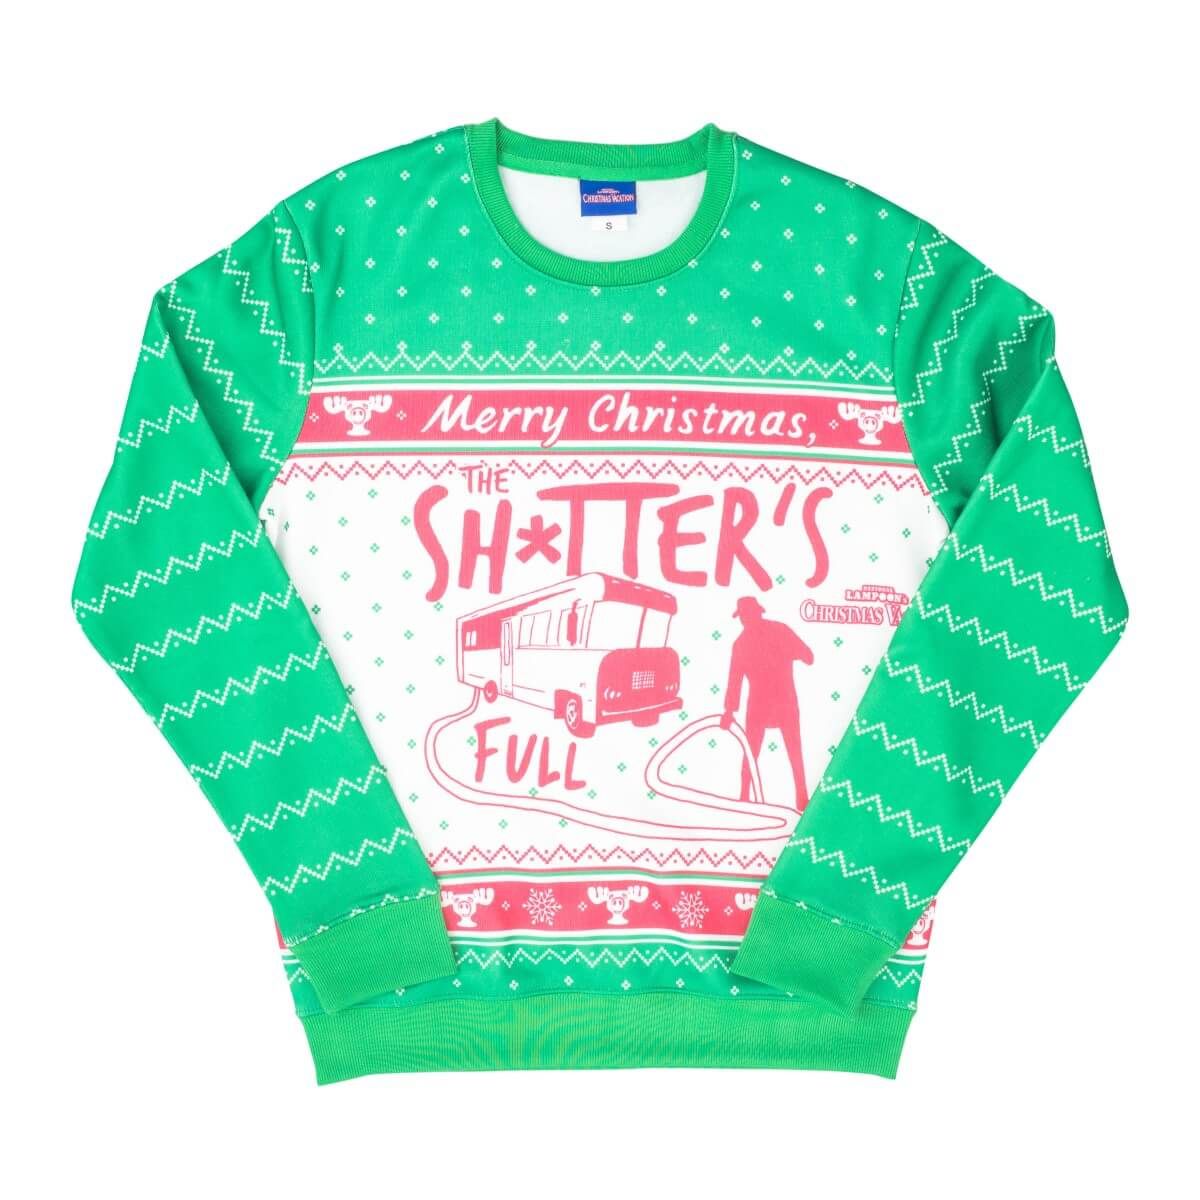 Buy National Lampoons Christmas Vacation Shitters Full For Unisex Ugly ...